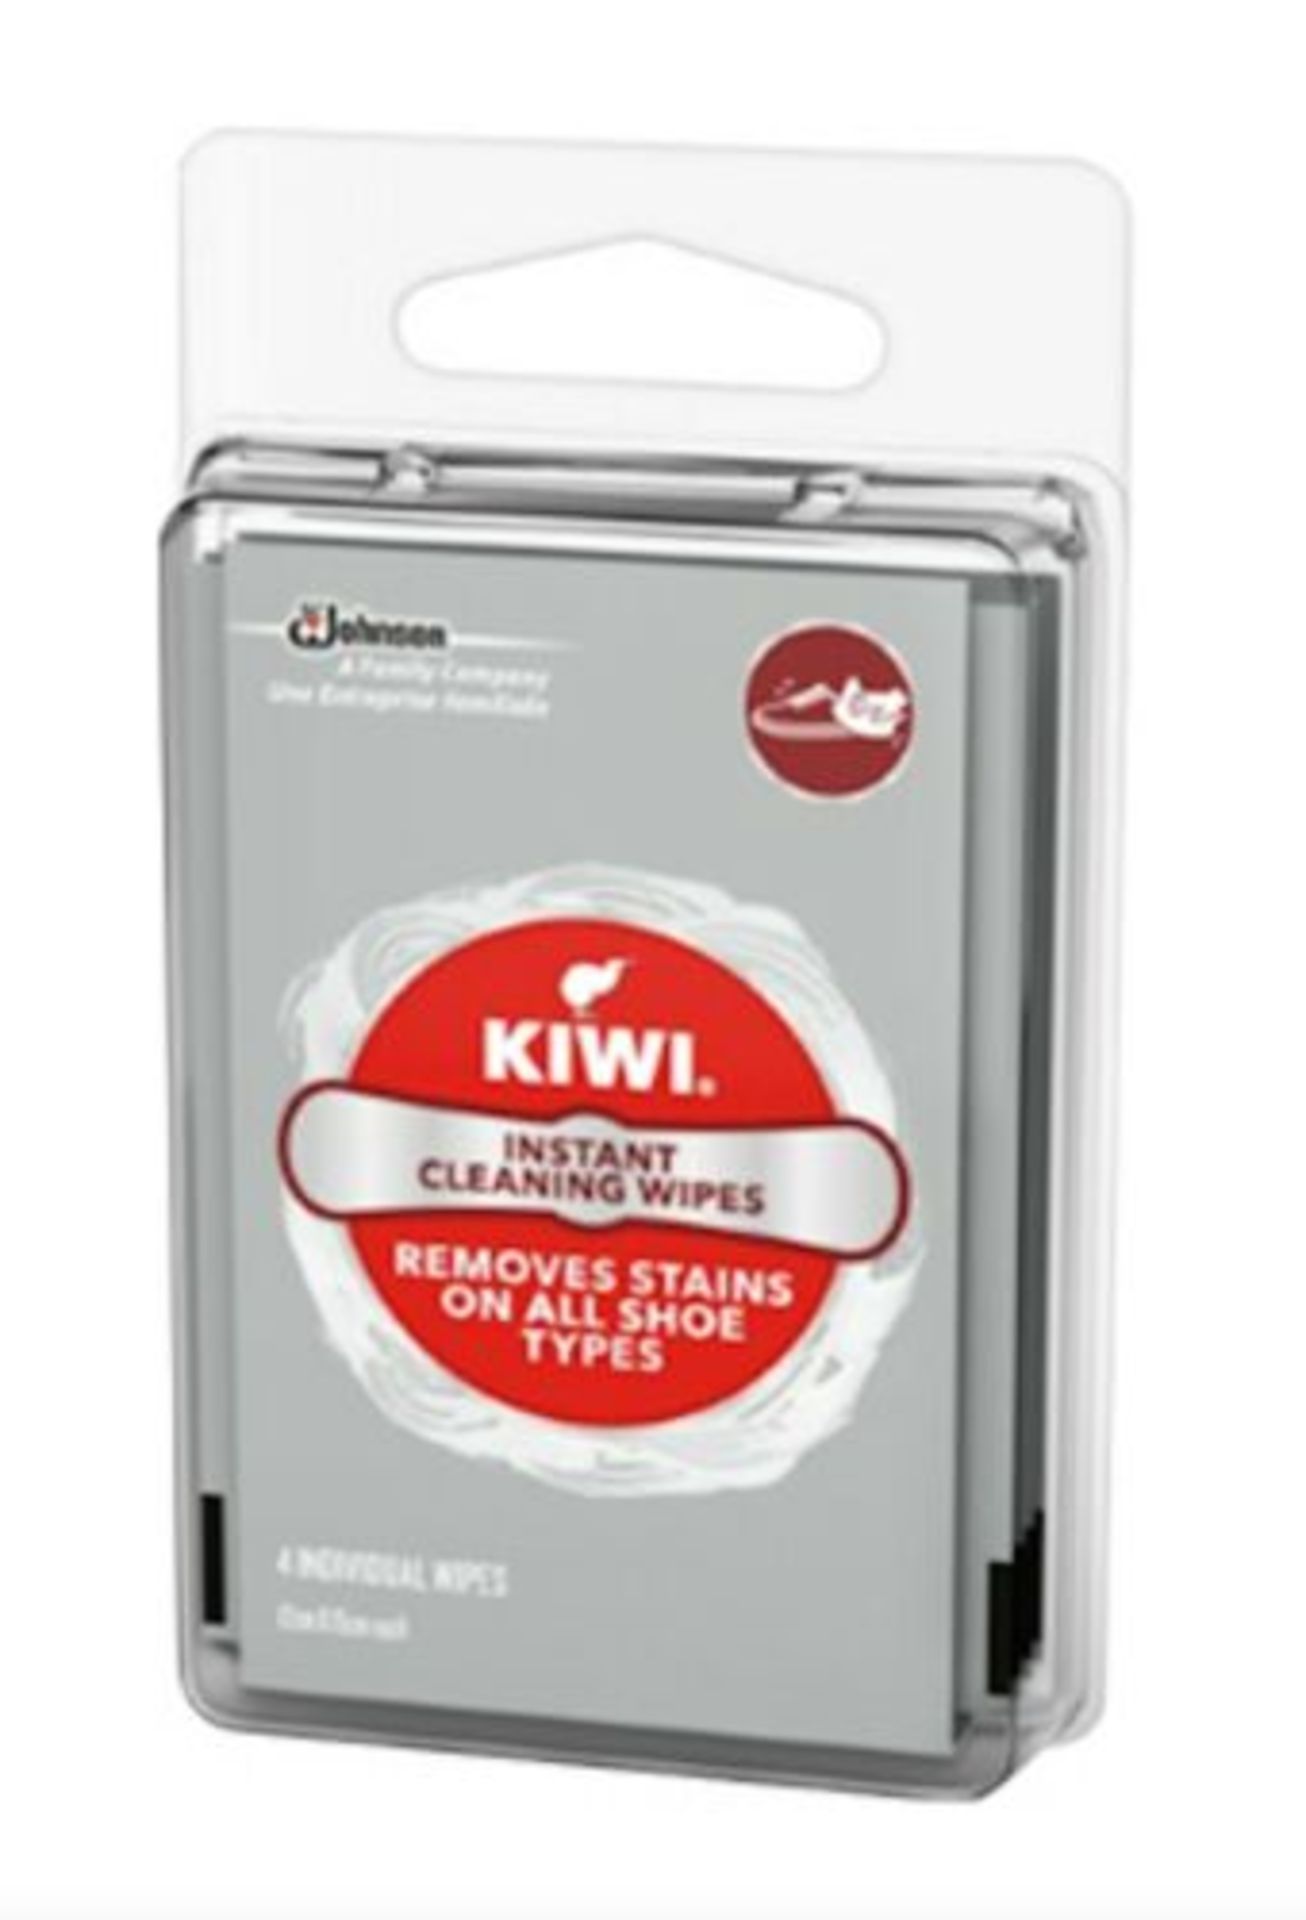 24 x 4 Packs of Kiwi Instant Shoe Cleaning Wipes RRP 6.